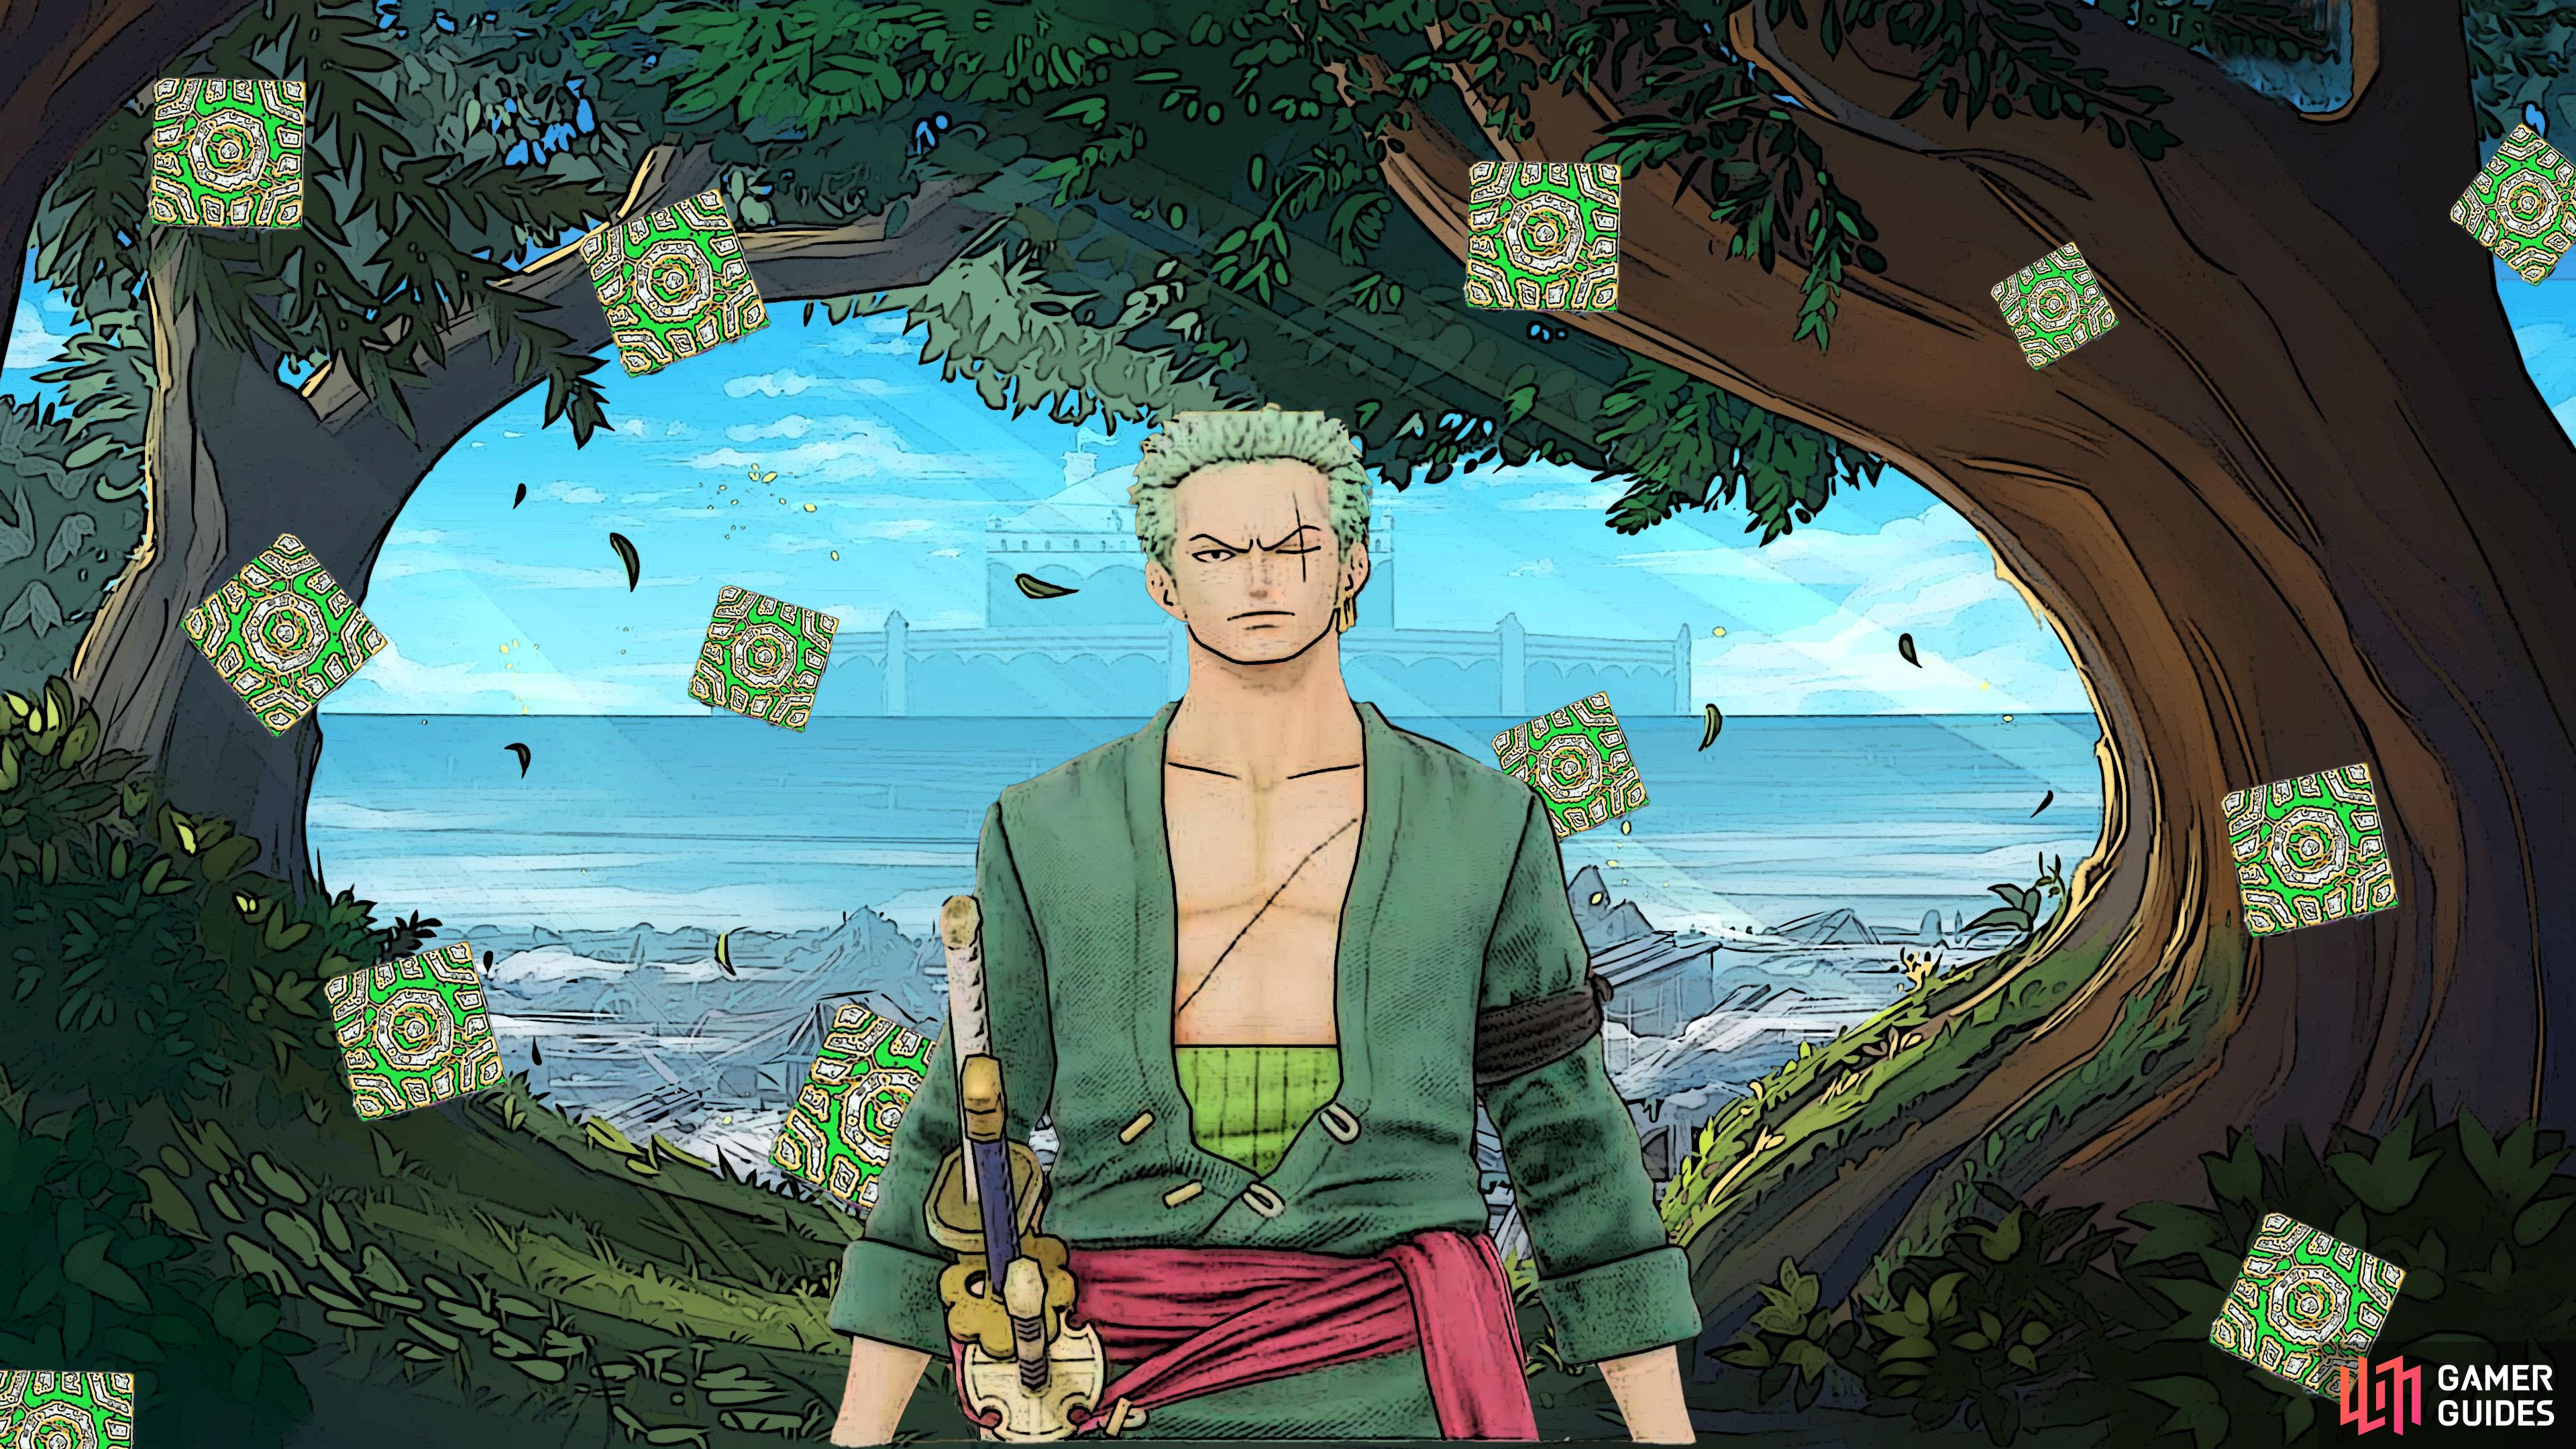 Zoro only needs 50 Cube Fragments to unlock the trophy/achievement.